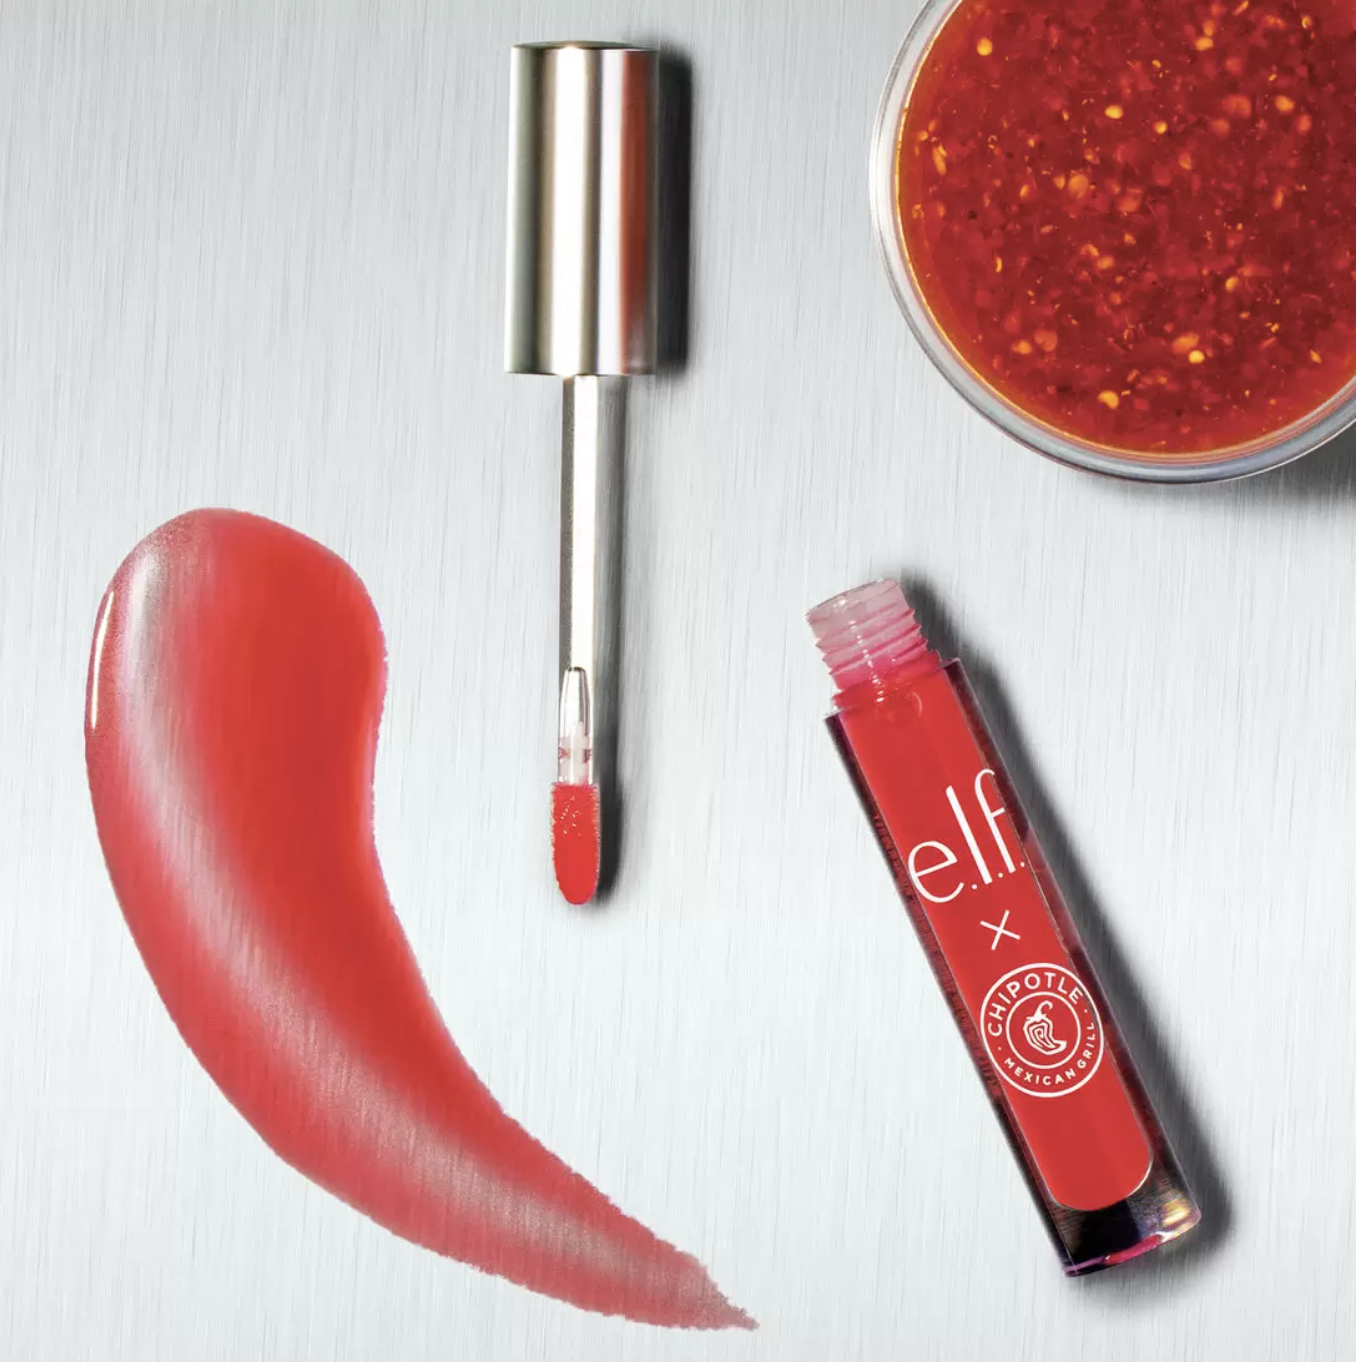 A clear lip gloss bottle with the Chipotle and E.l.f. logos with a brush swatching a chili shape